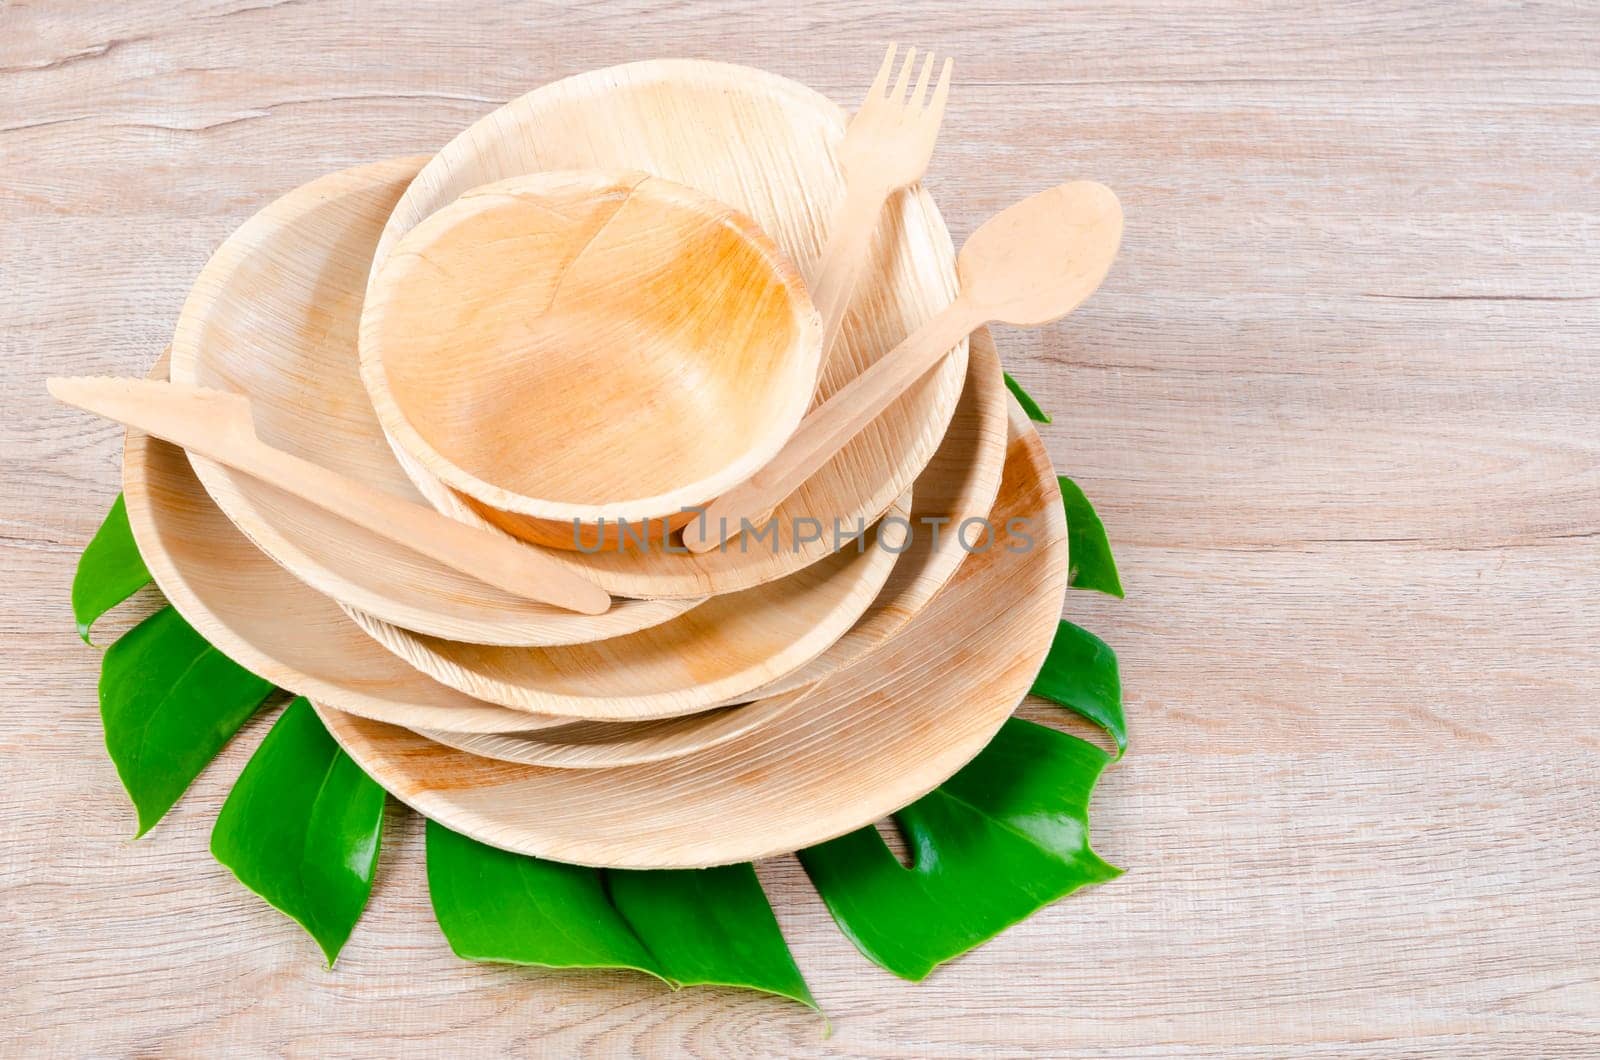 The Kitchenware made from dried betel nut leaf palm, natural material. The Green product eco friendly concept. by Gamjai